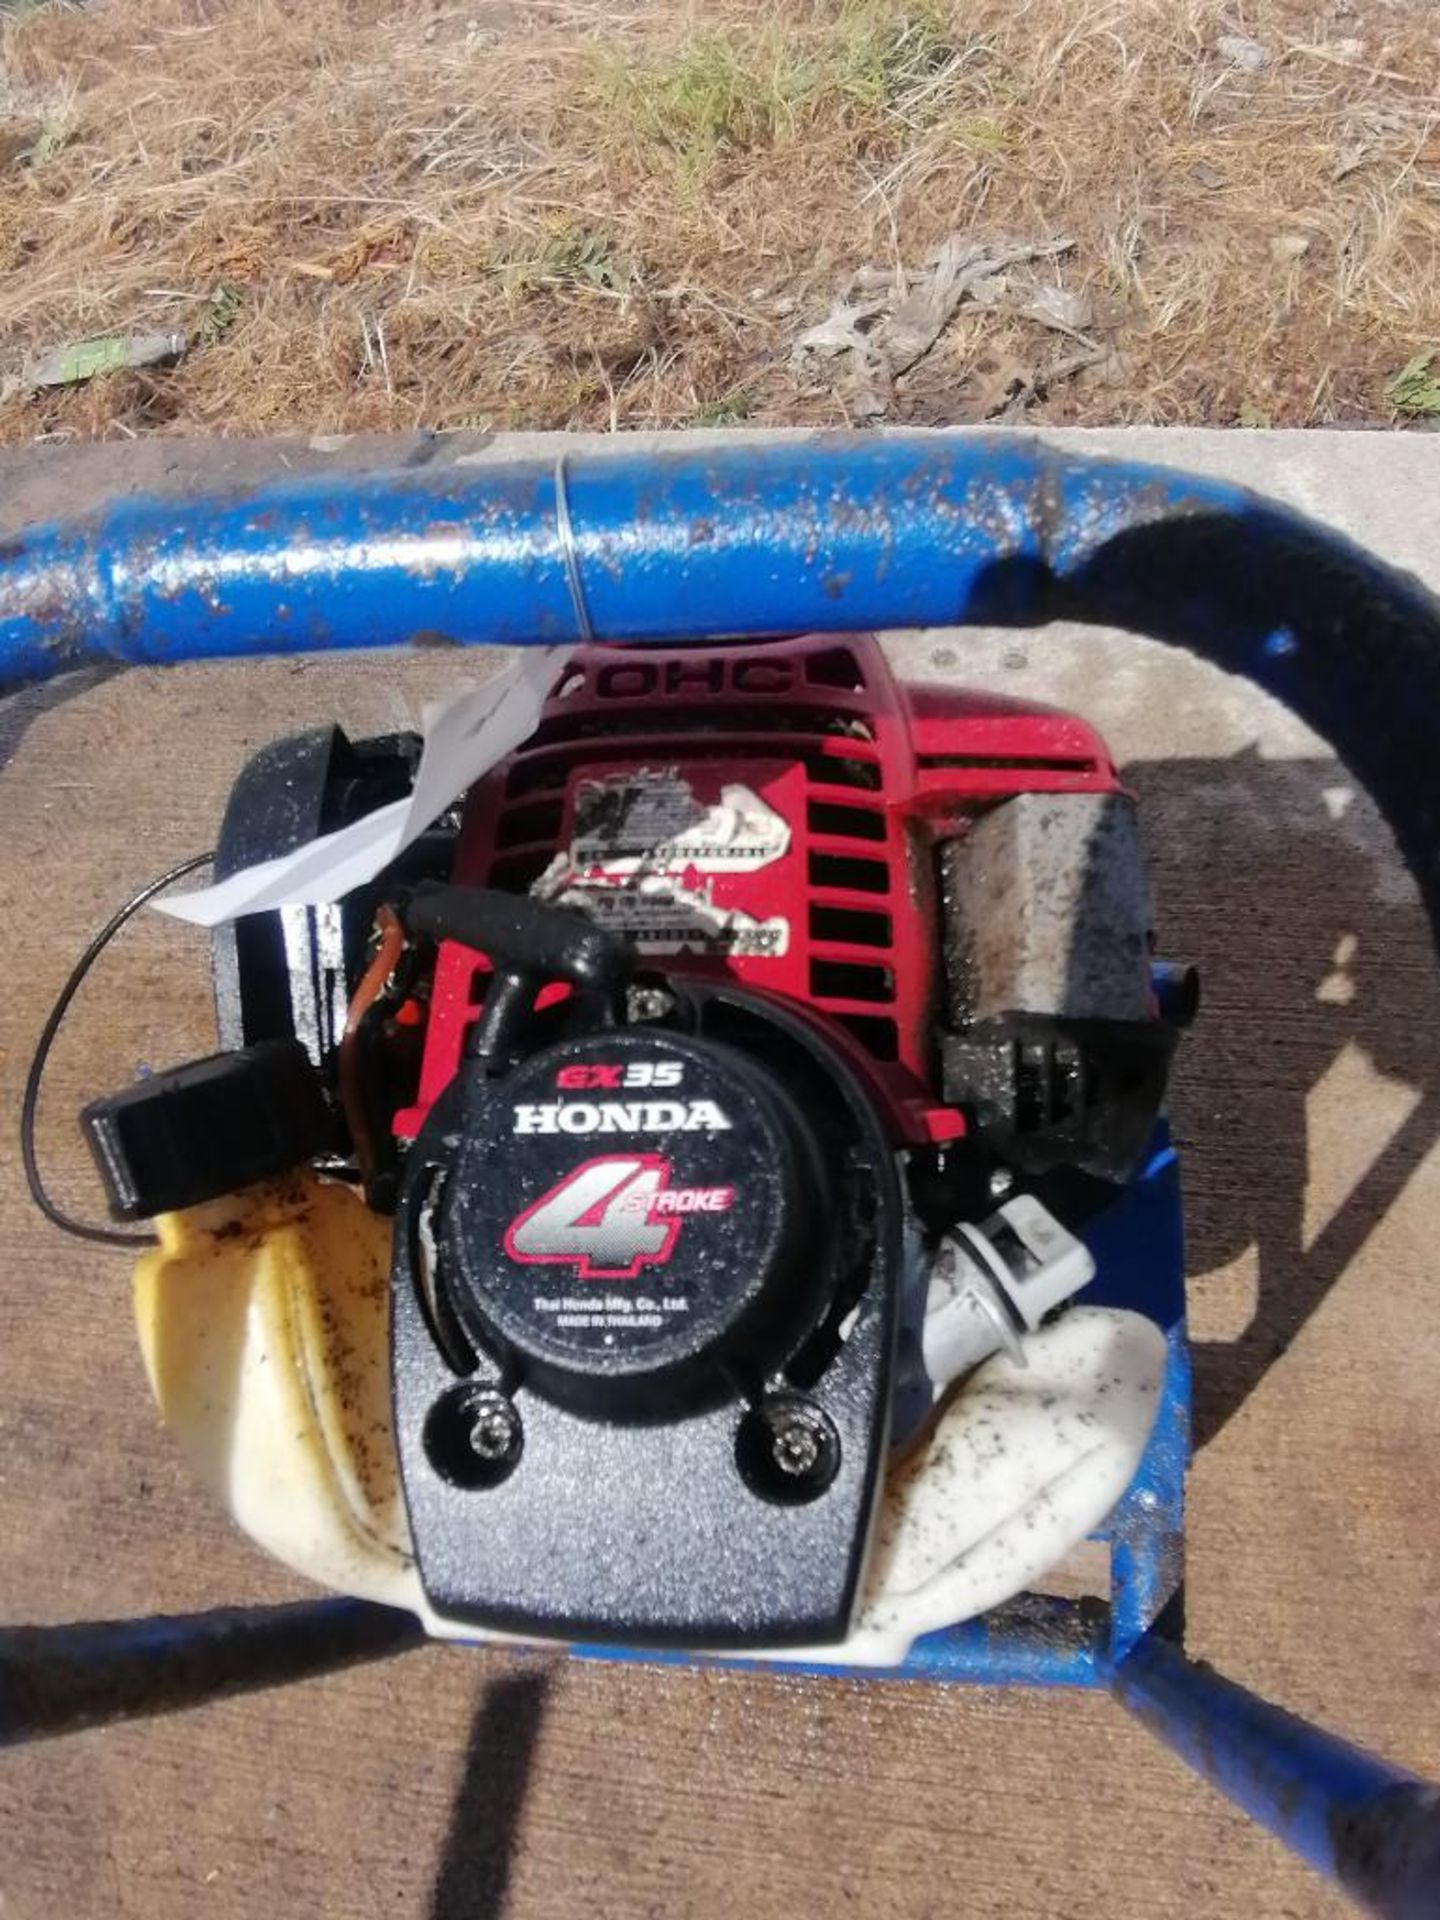 Shockwave Power Screed with Honda GX35 Motor. Serial #5914, 128.3 Hours. Located in Mt. Pleasant, - Image 2 of 6